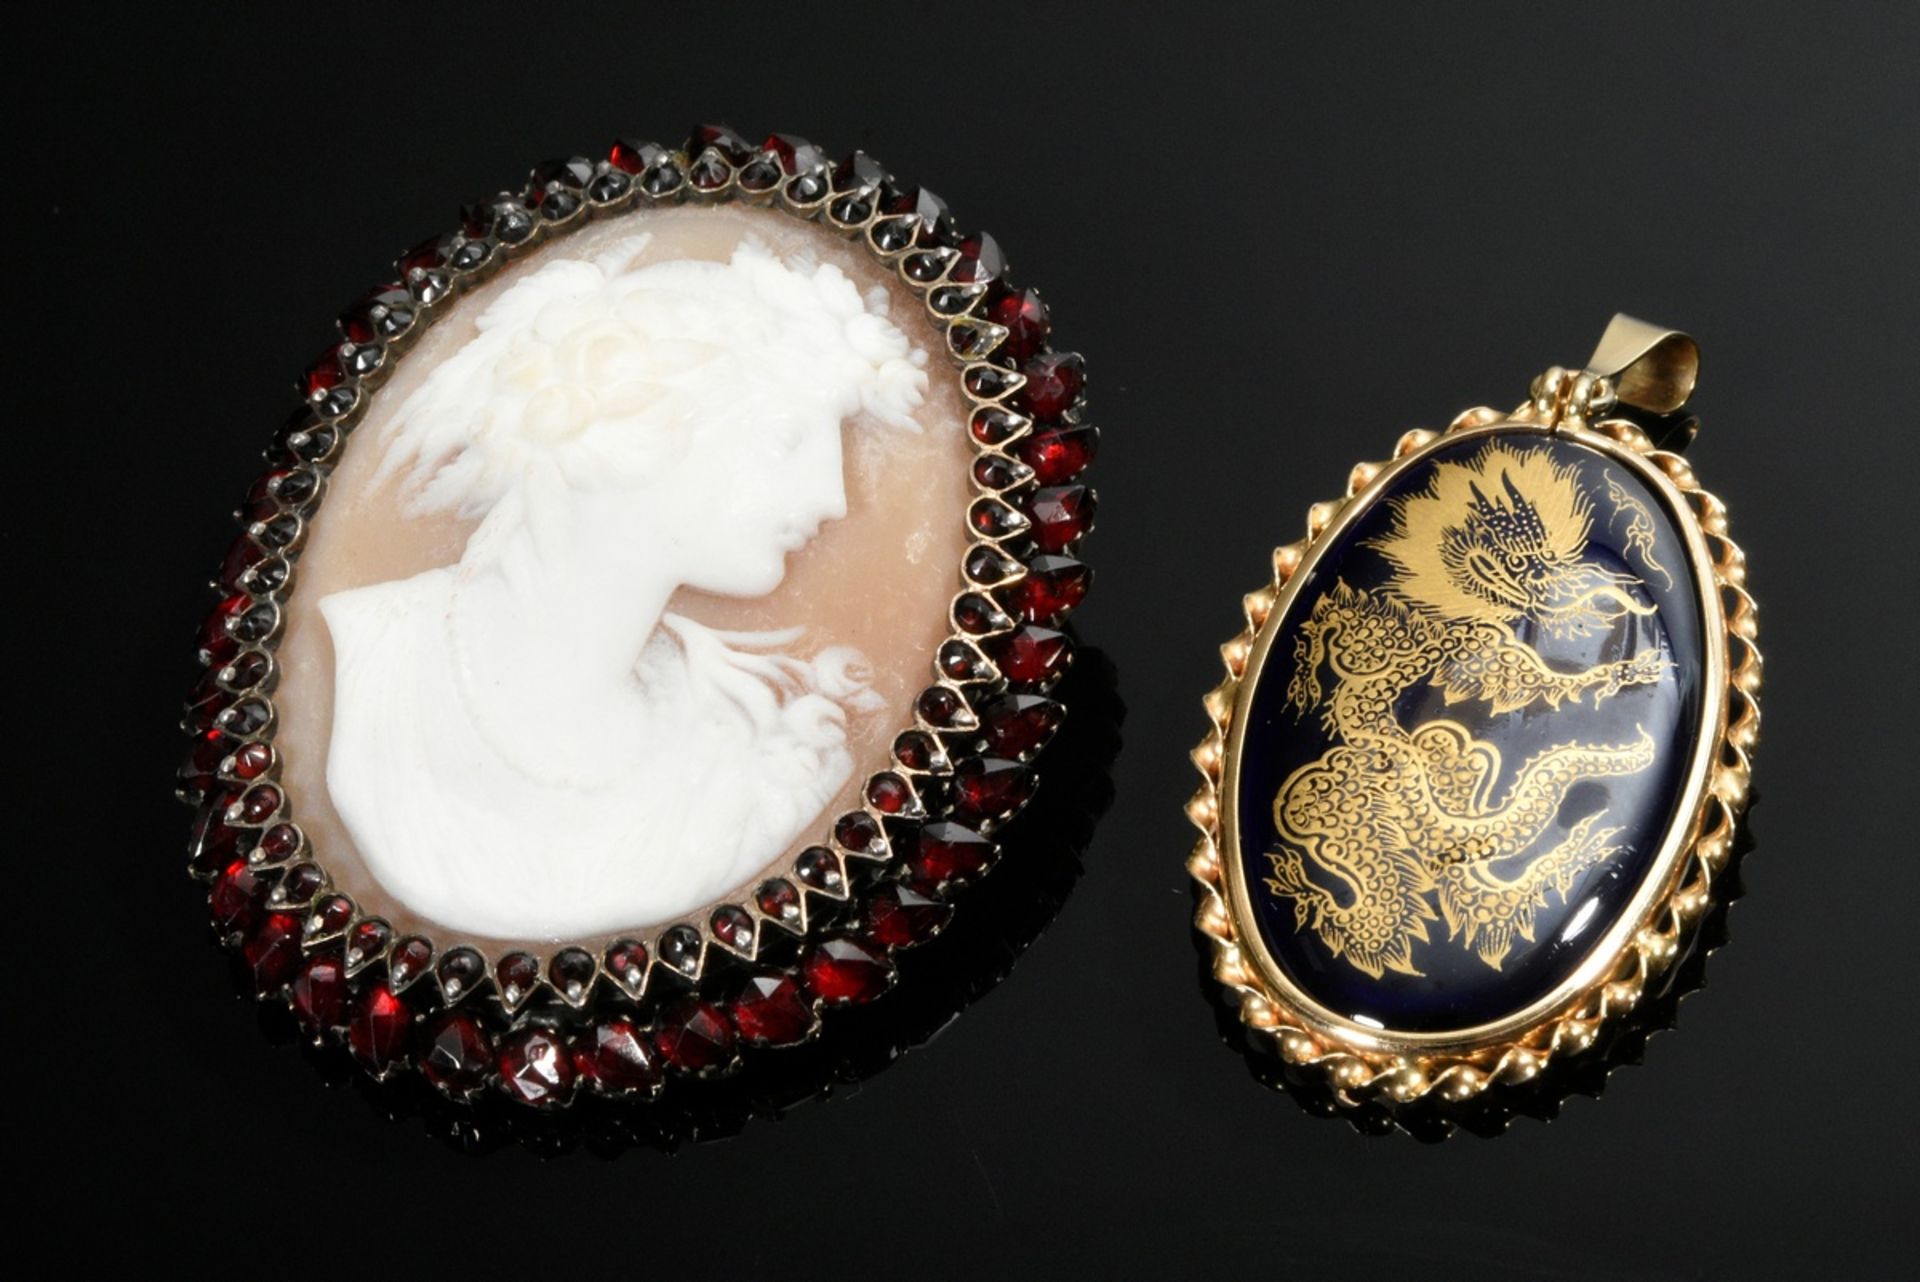 2 Various pieces of jewellery: Meissen plaque with flawless gold painting on black background "Drag